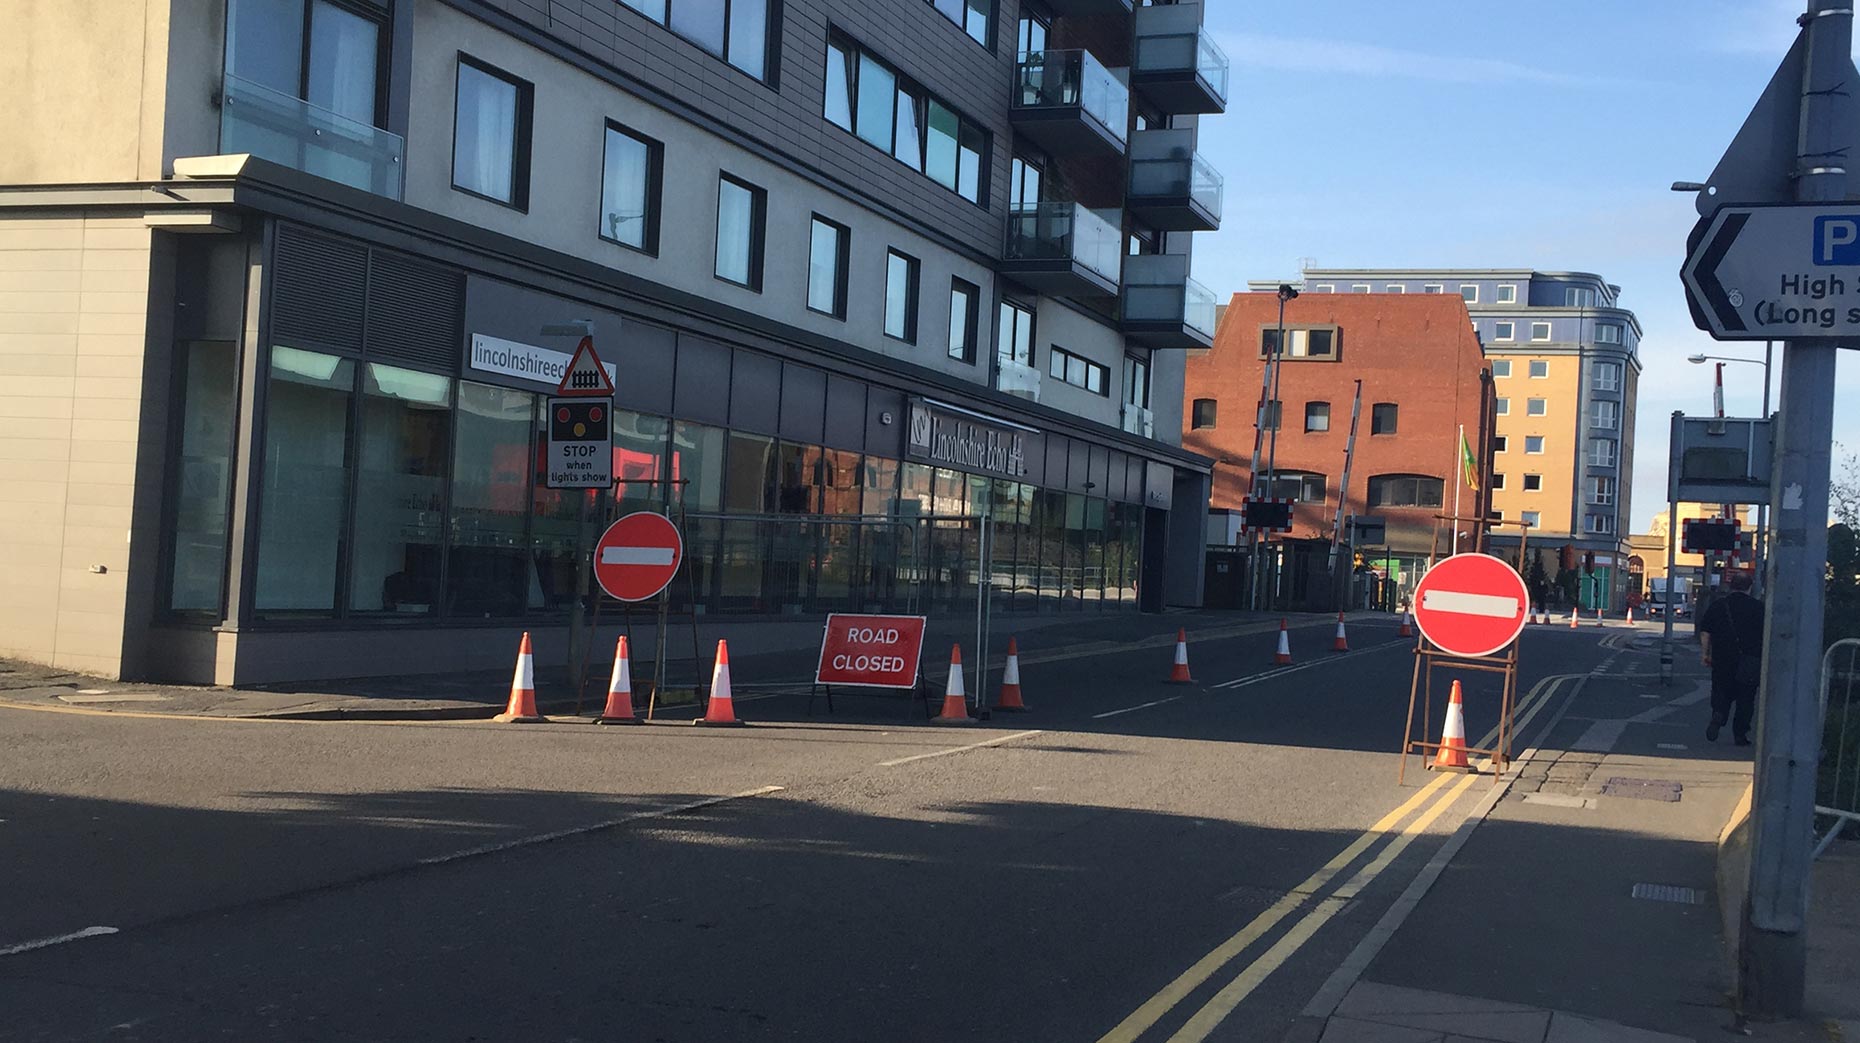 The lane was closed along with the opening of the city's new £22 million East West Link road.